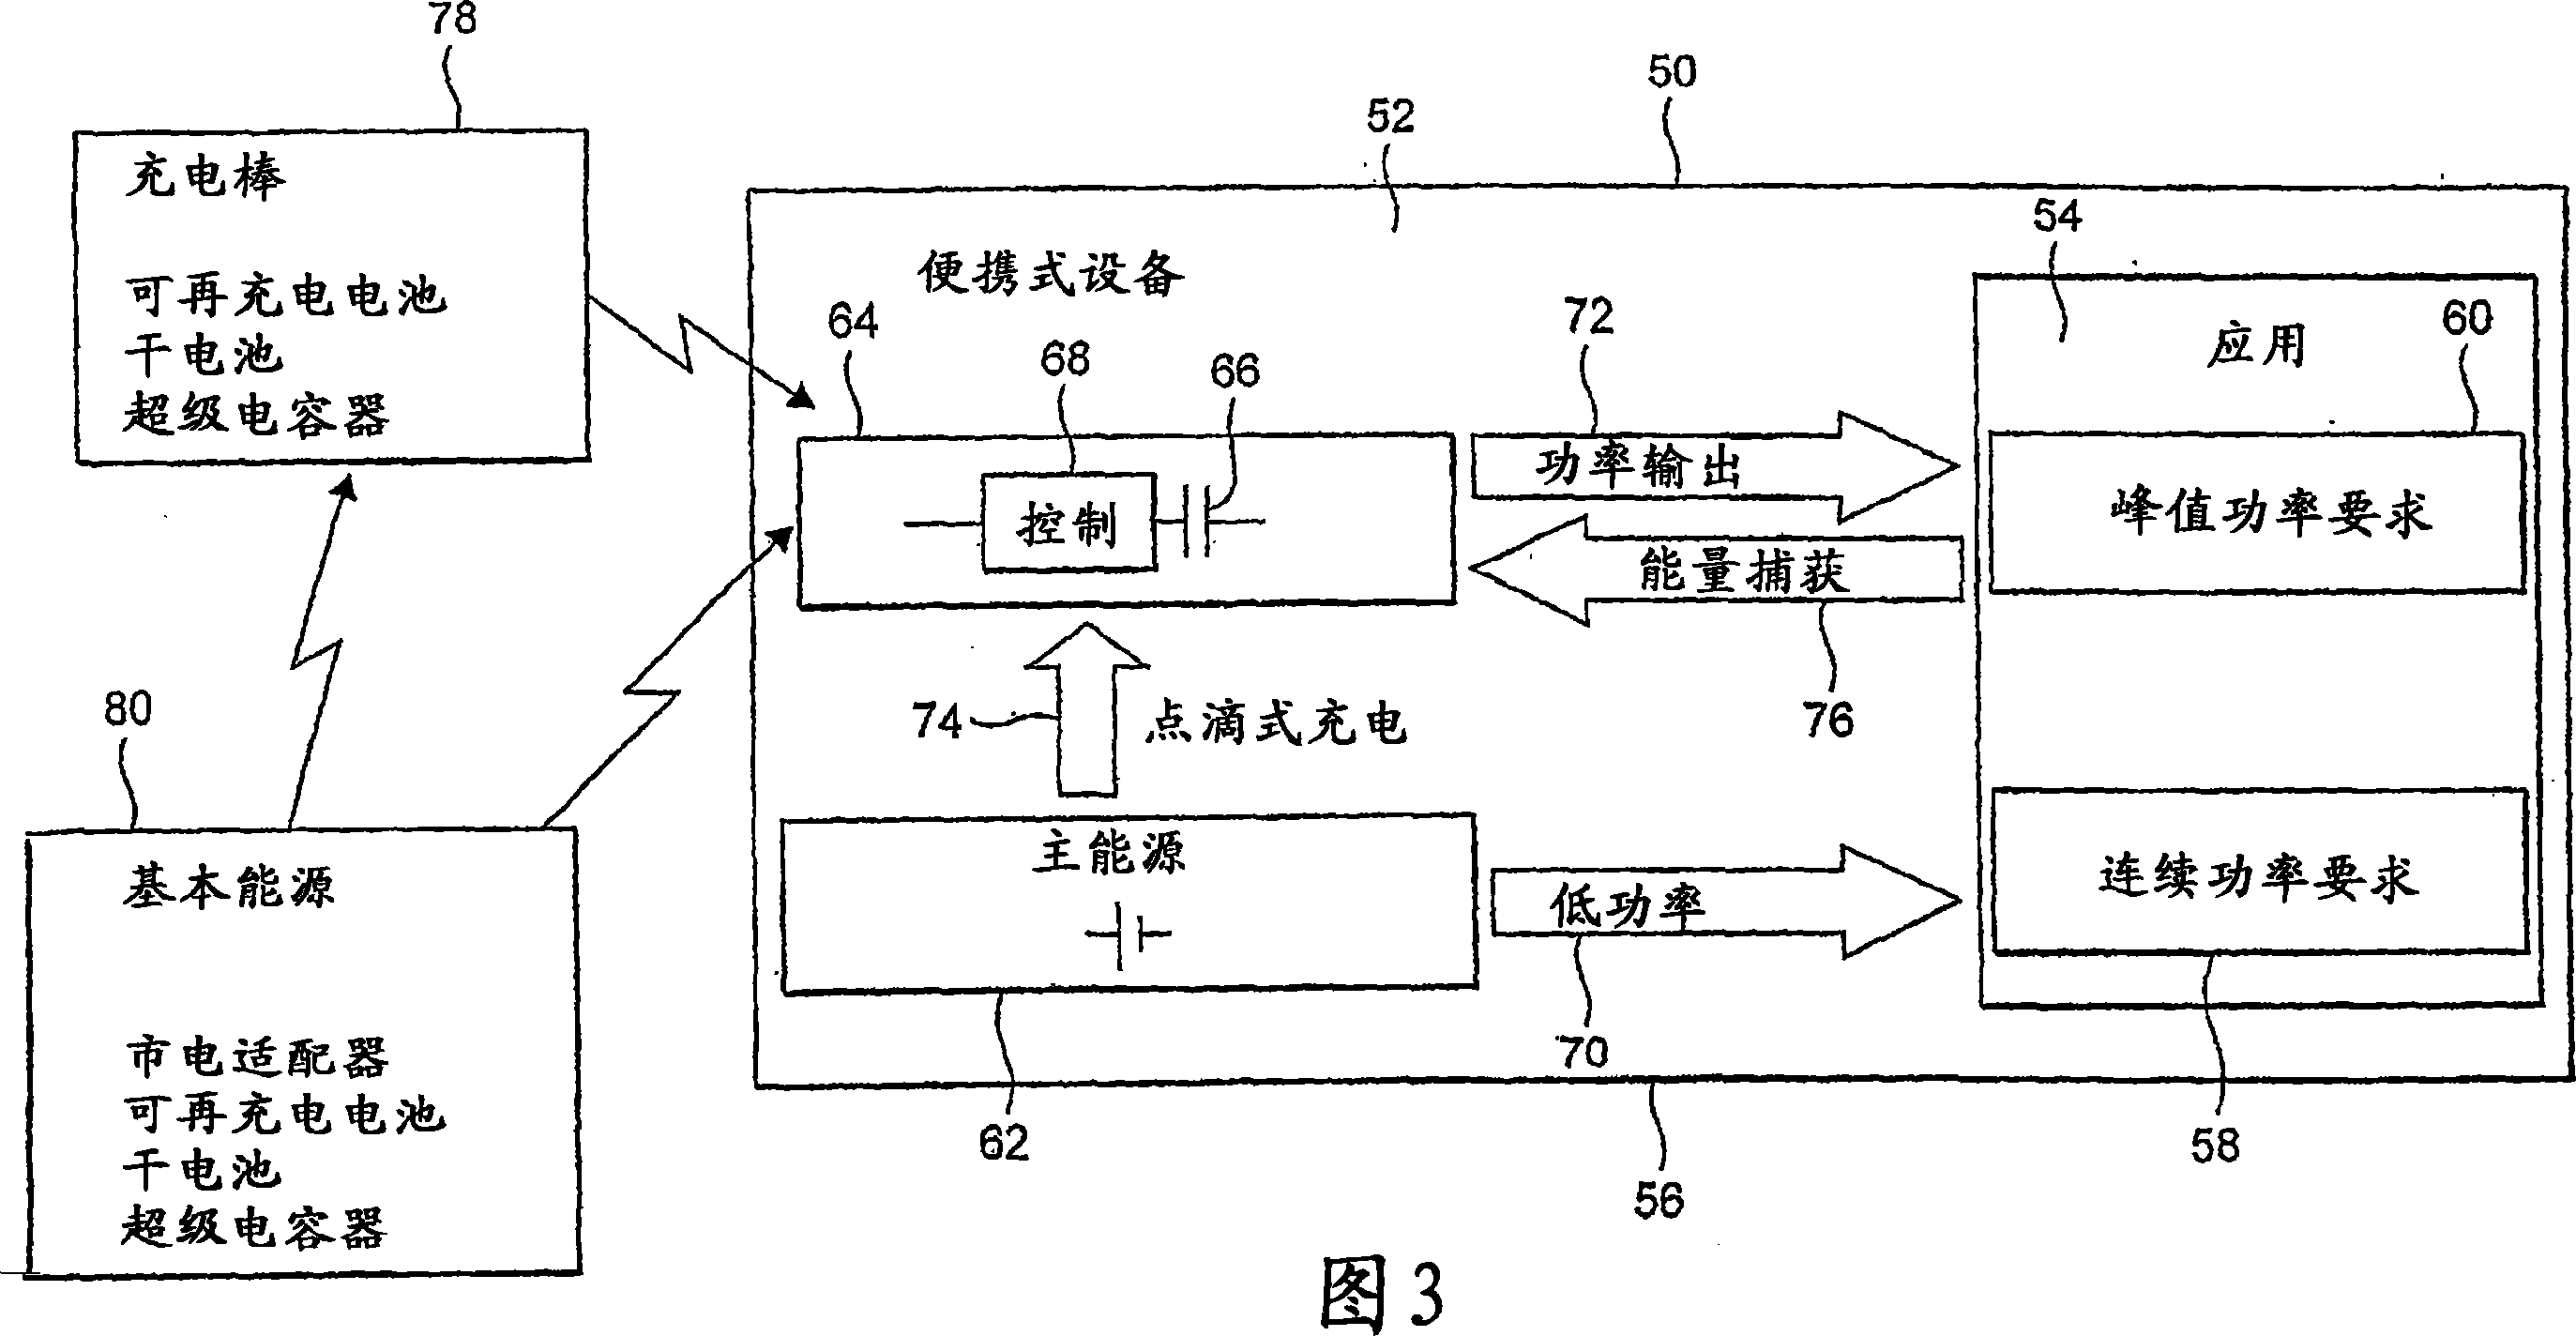 Power supply systems for electrical devices